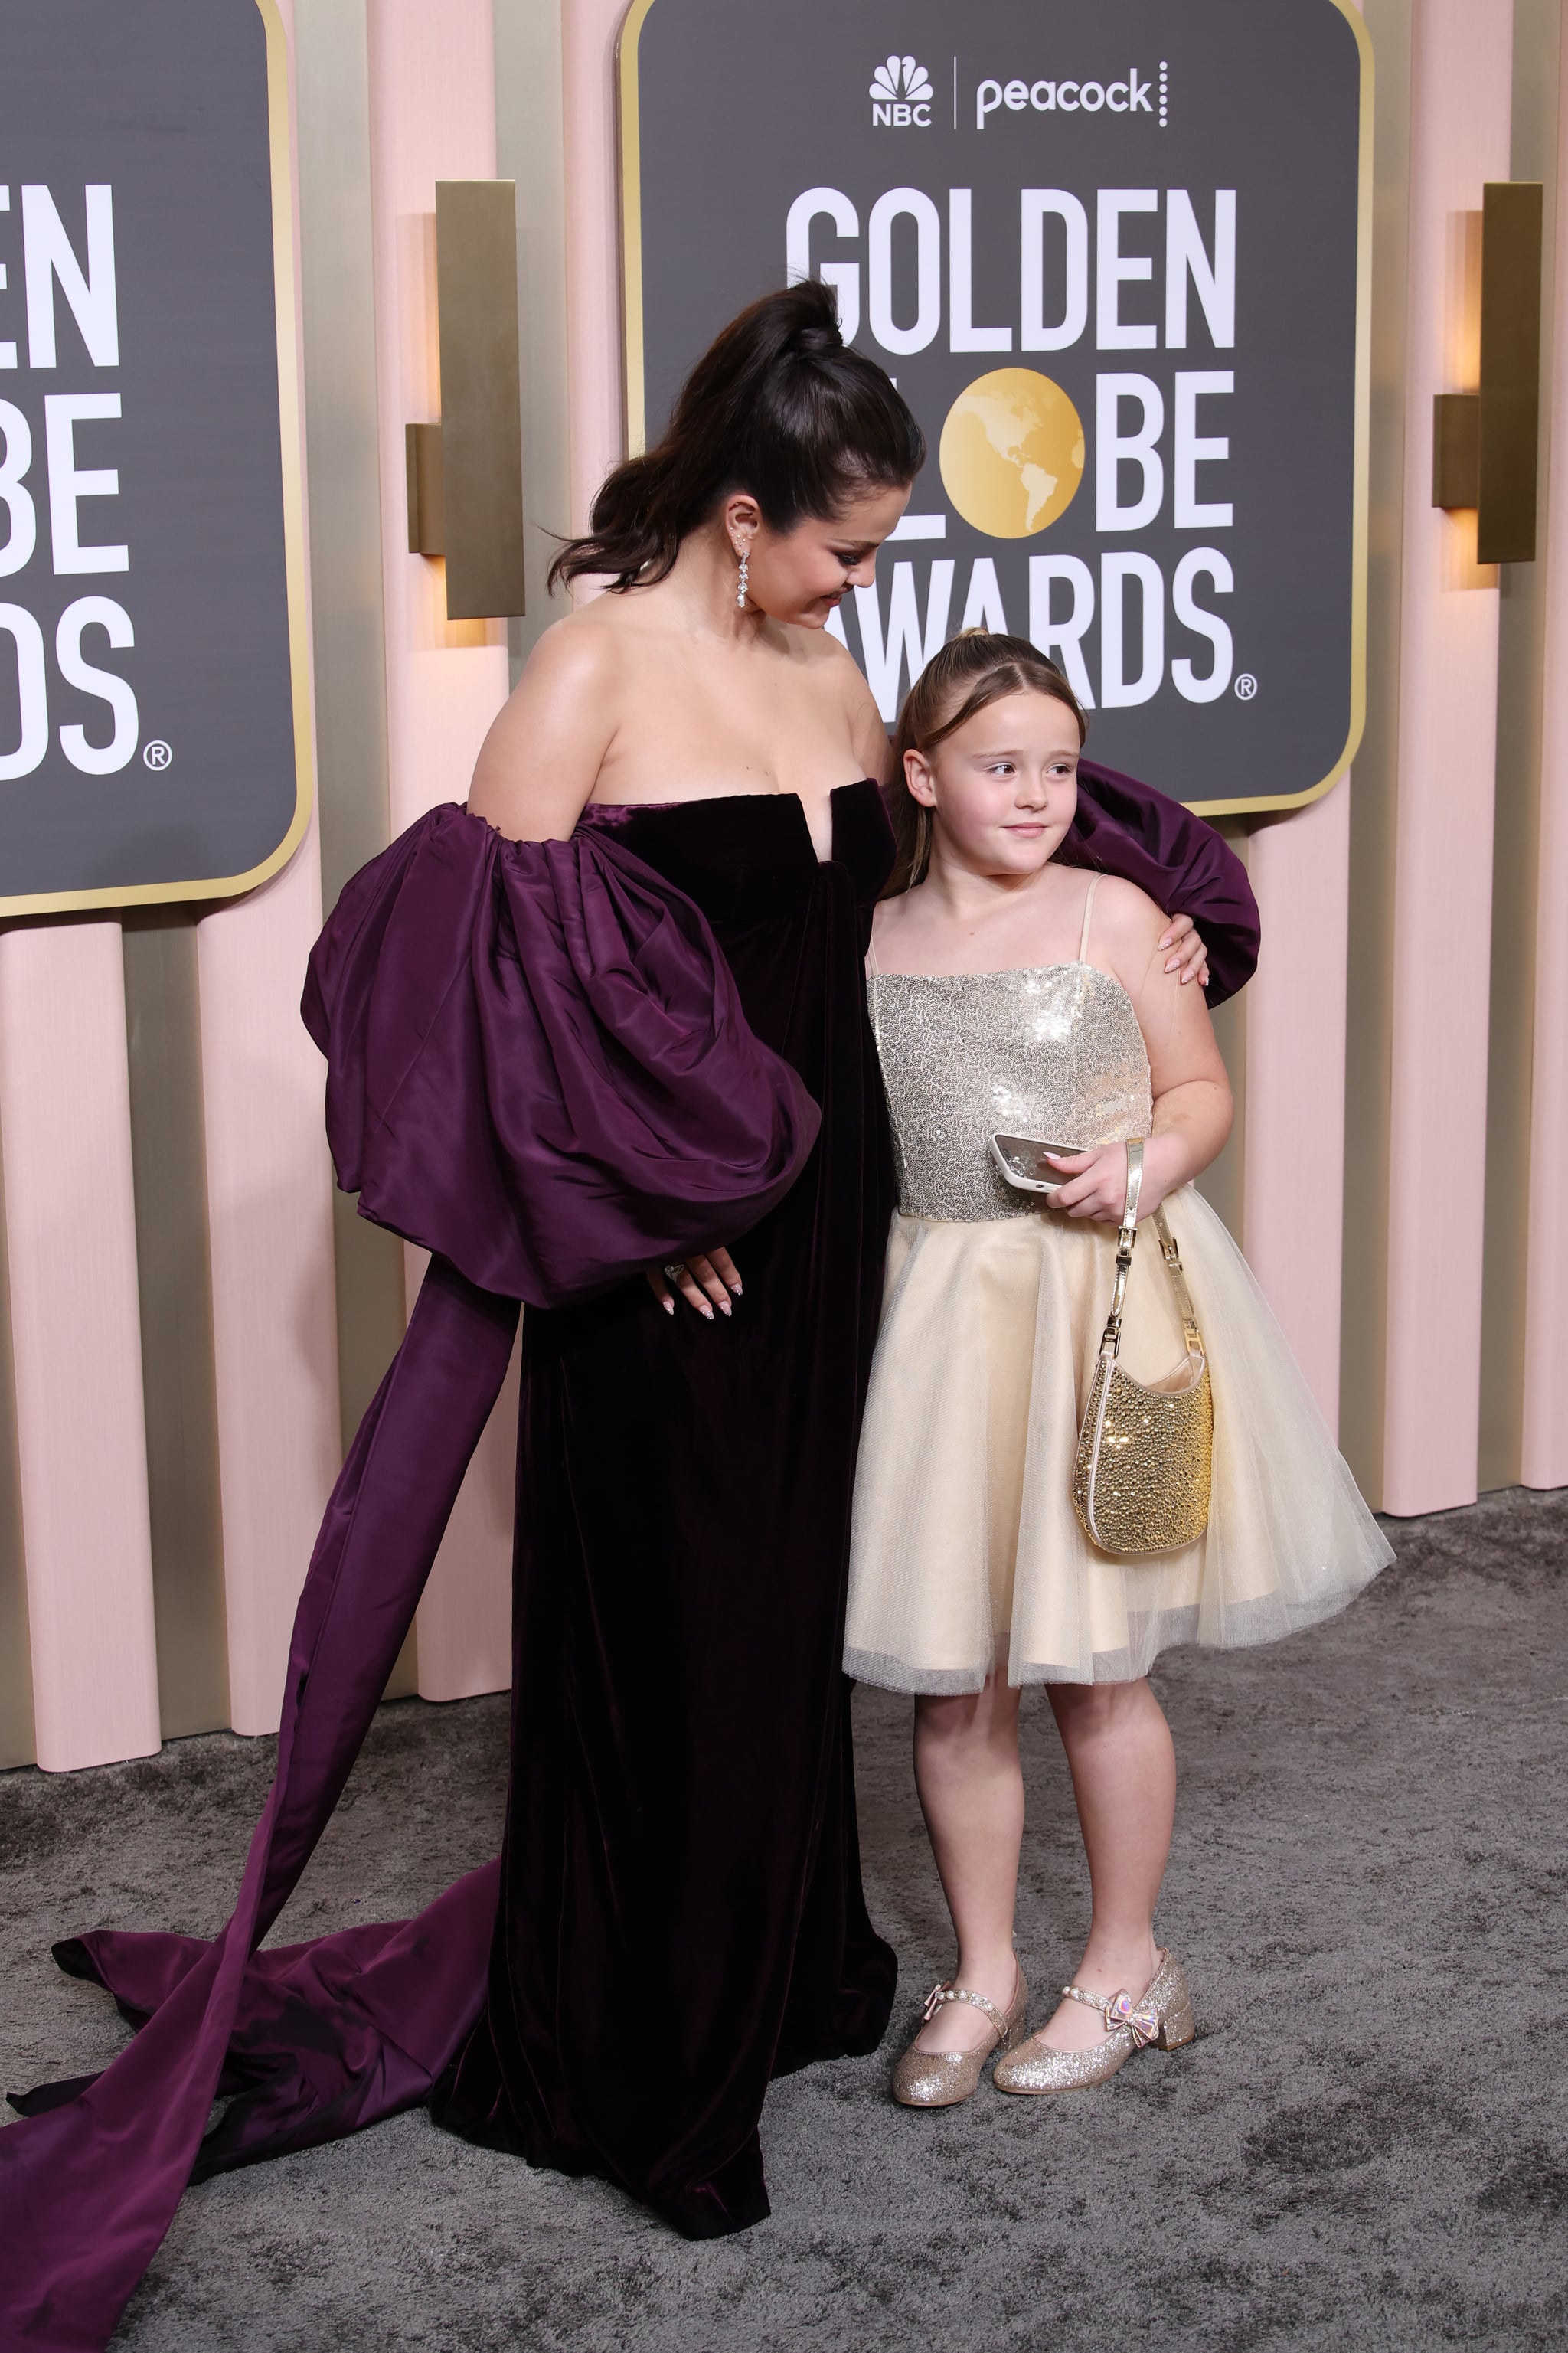 BEVERLY HILLS, CALIFORNIA - JANUARY 10: Selena Gomez and Gracie Elliot Teefey attend the 80th Annual Golden Globe Awards at The Beverly Hilton on January 10, 2023 in Beverly Hills, California. (Photo by Daniele Venturelli/WireImage)